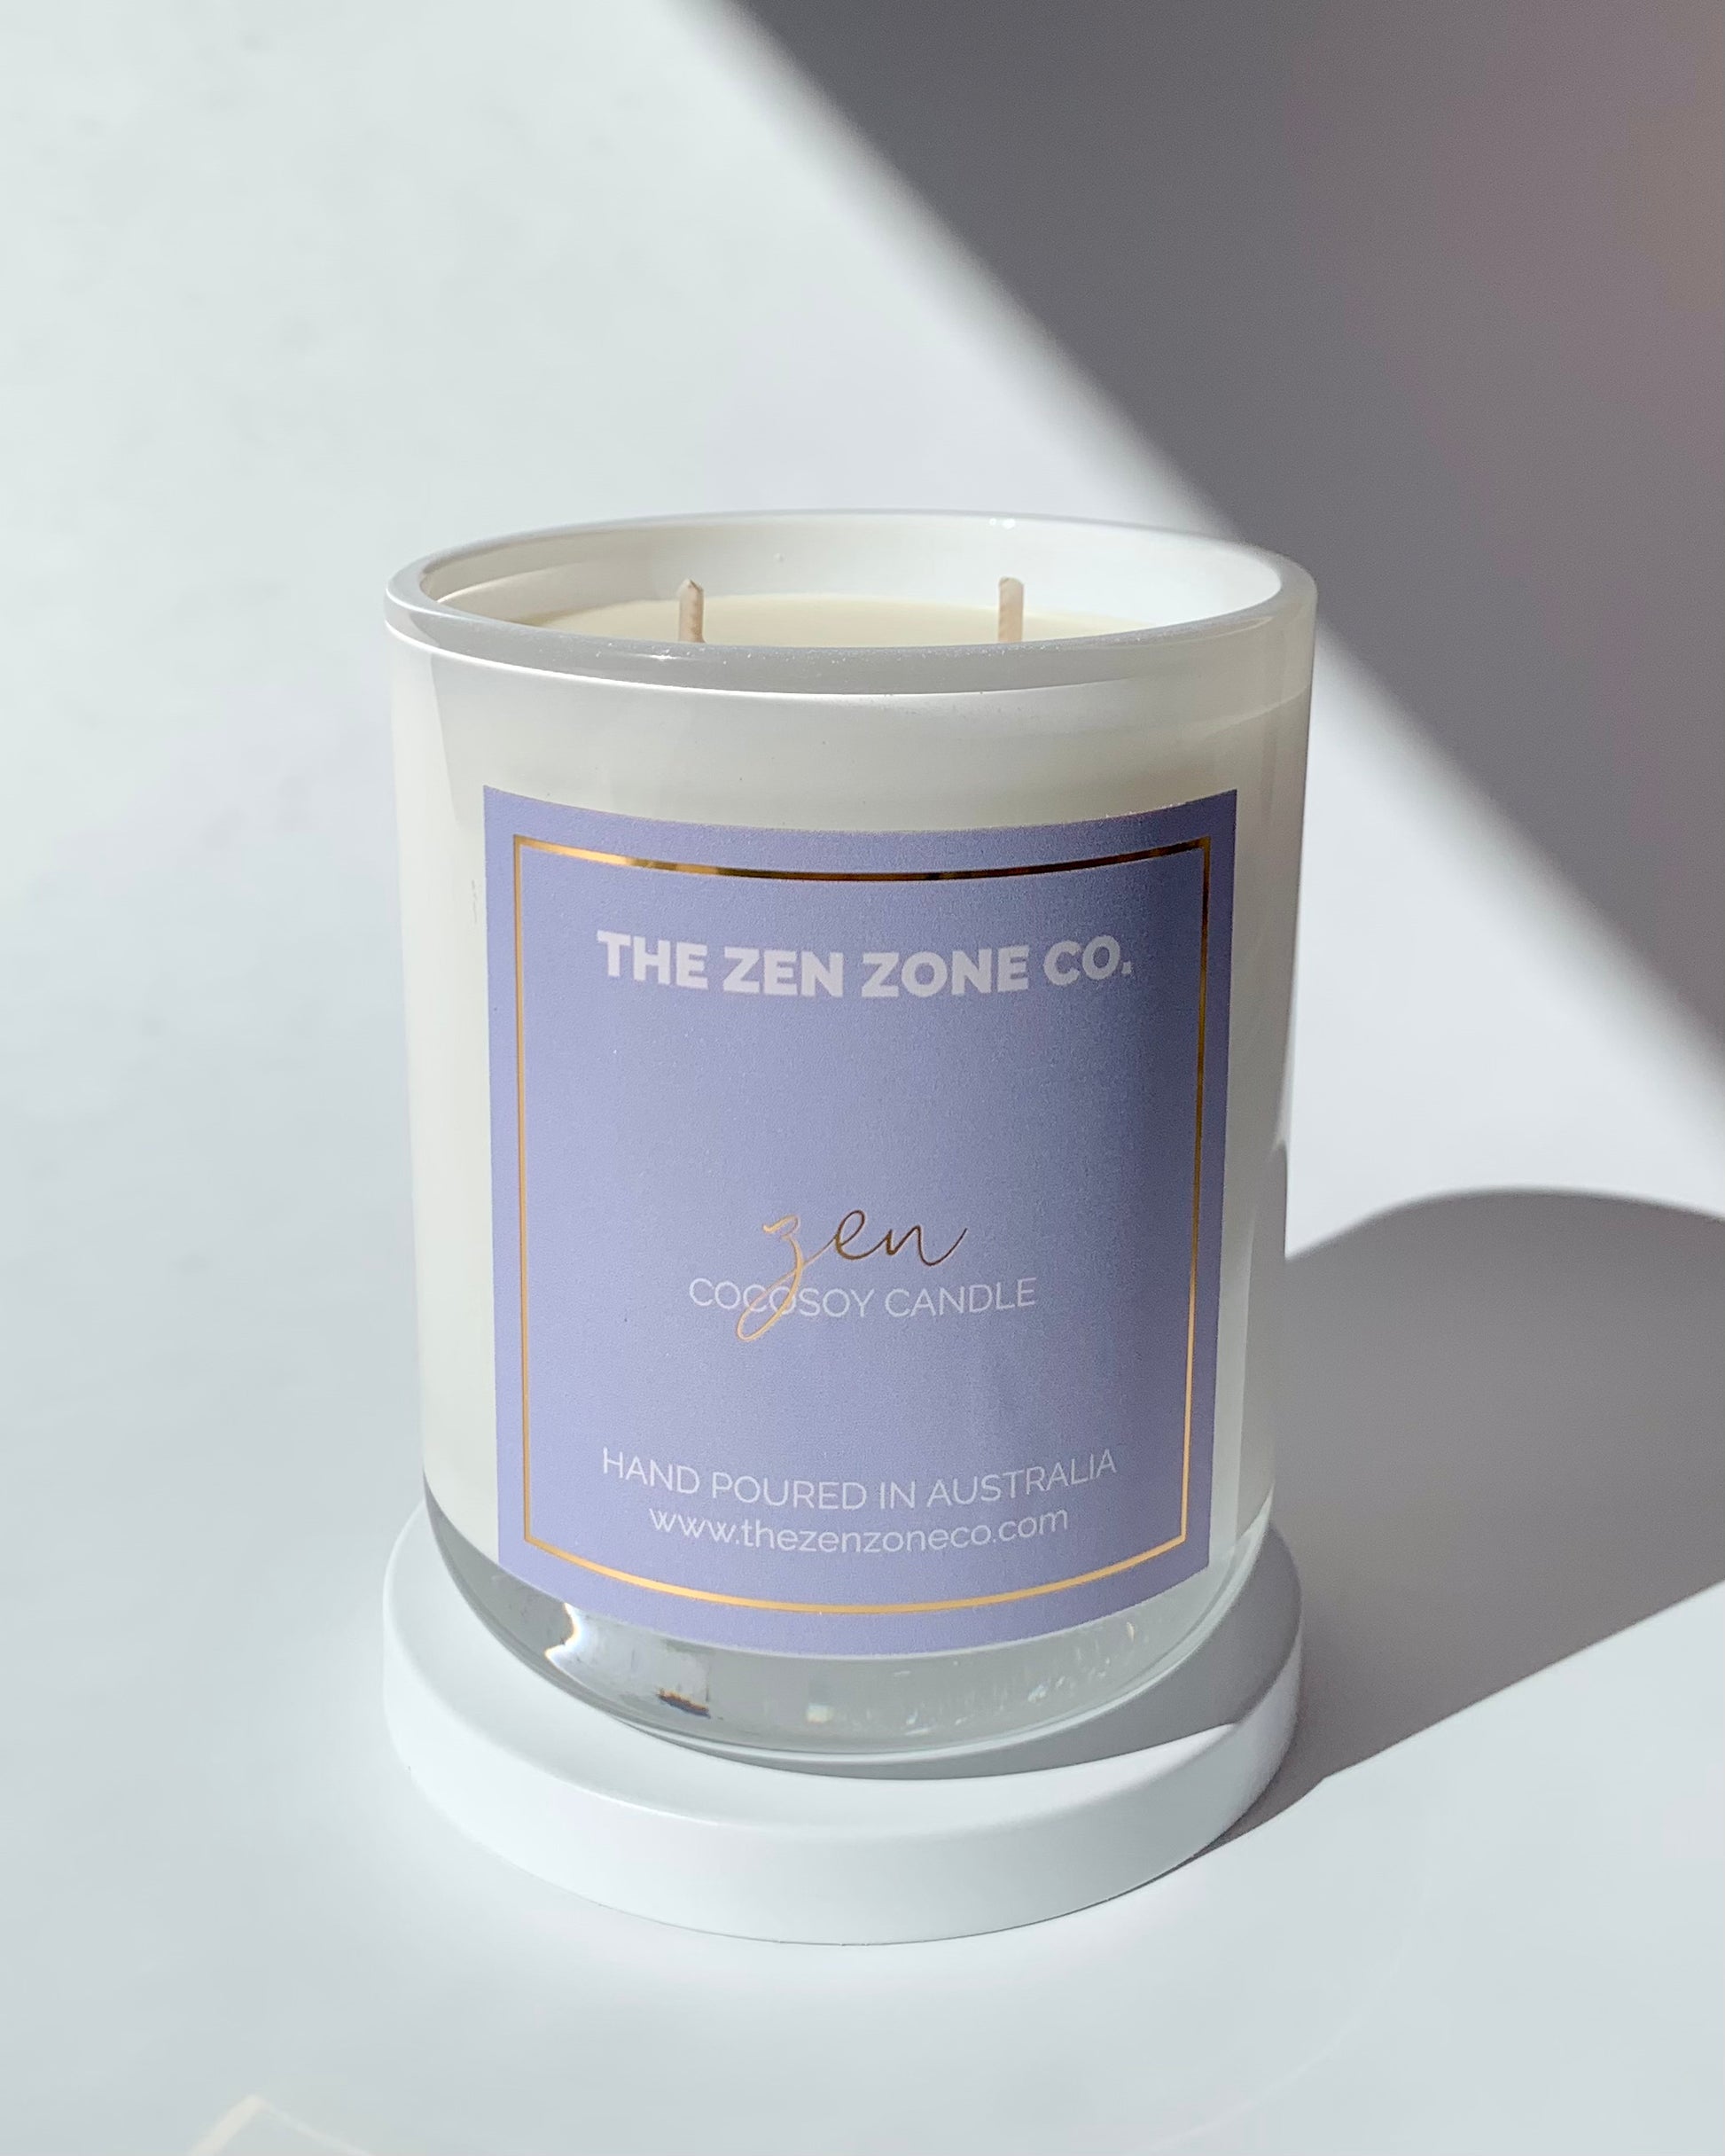 leather and sandalwood candle by The Zen Zone Co